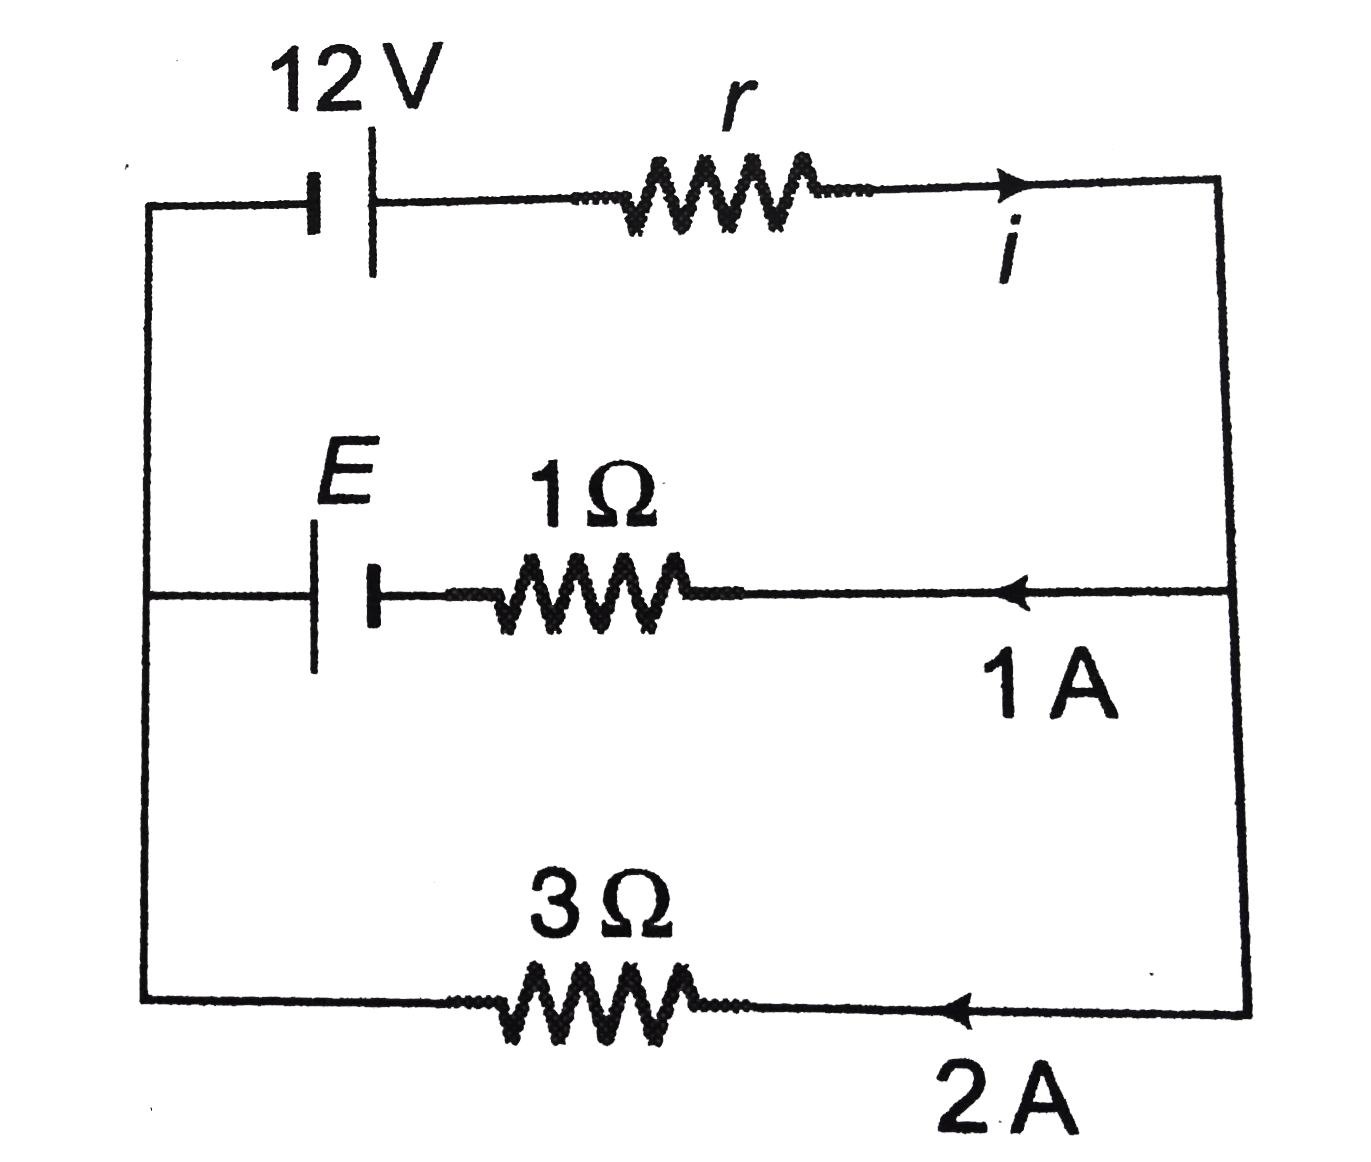 In the circuit shown in figure a 12 V battery with unknown internal resistance r is connected to another battery with unknown emf E and internal resistance 1Omega  and to a resistance of 3Omega carrying a current of 2A. The current through the rechargeable battery is 1 A in the direction shown. Figure the unknown current i internal resistance r and the emf E.